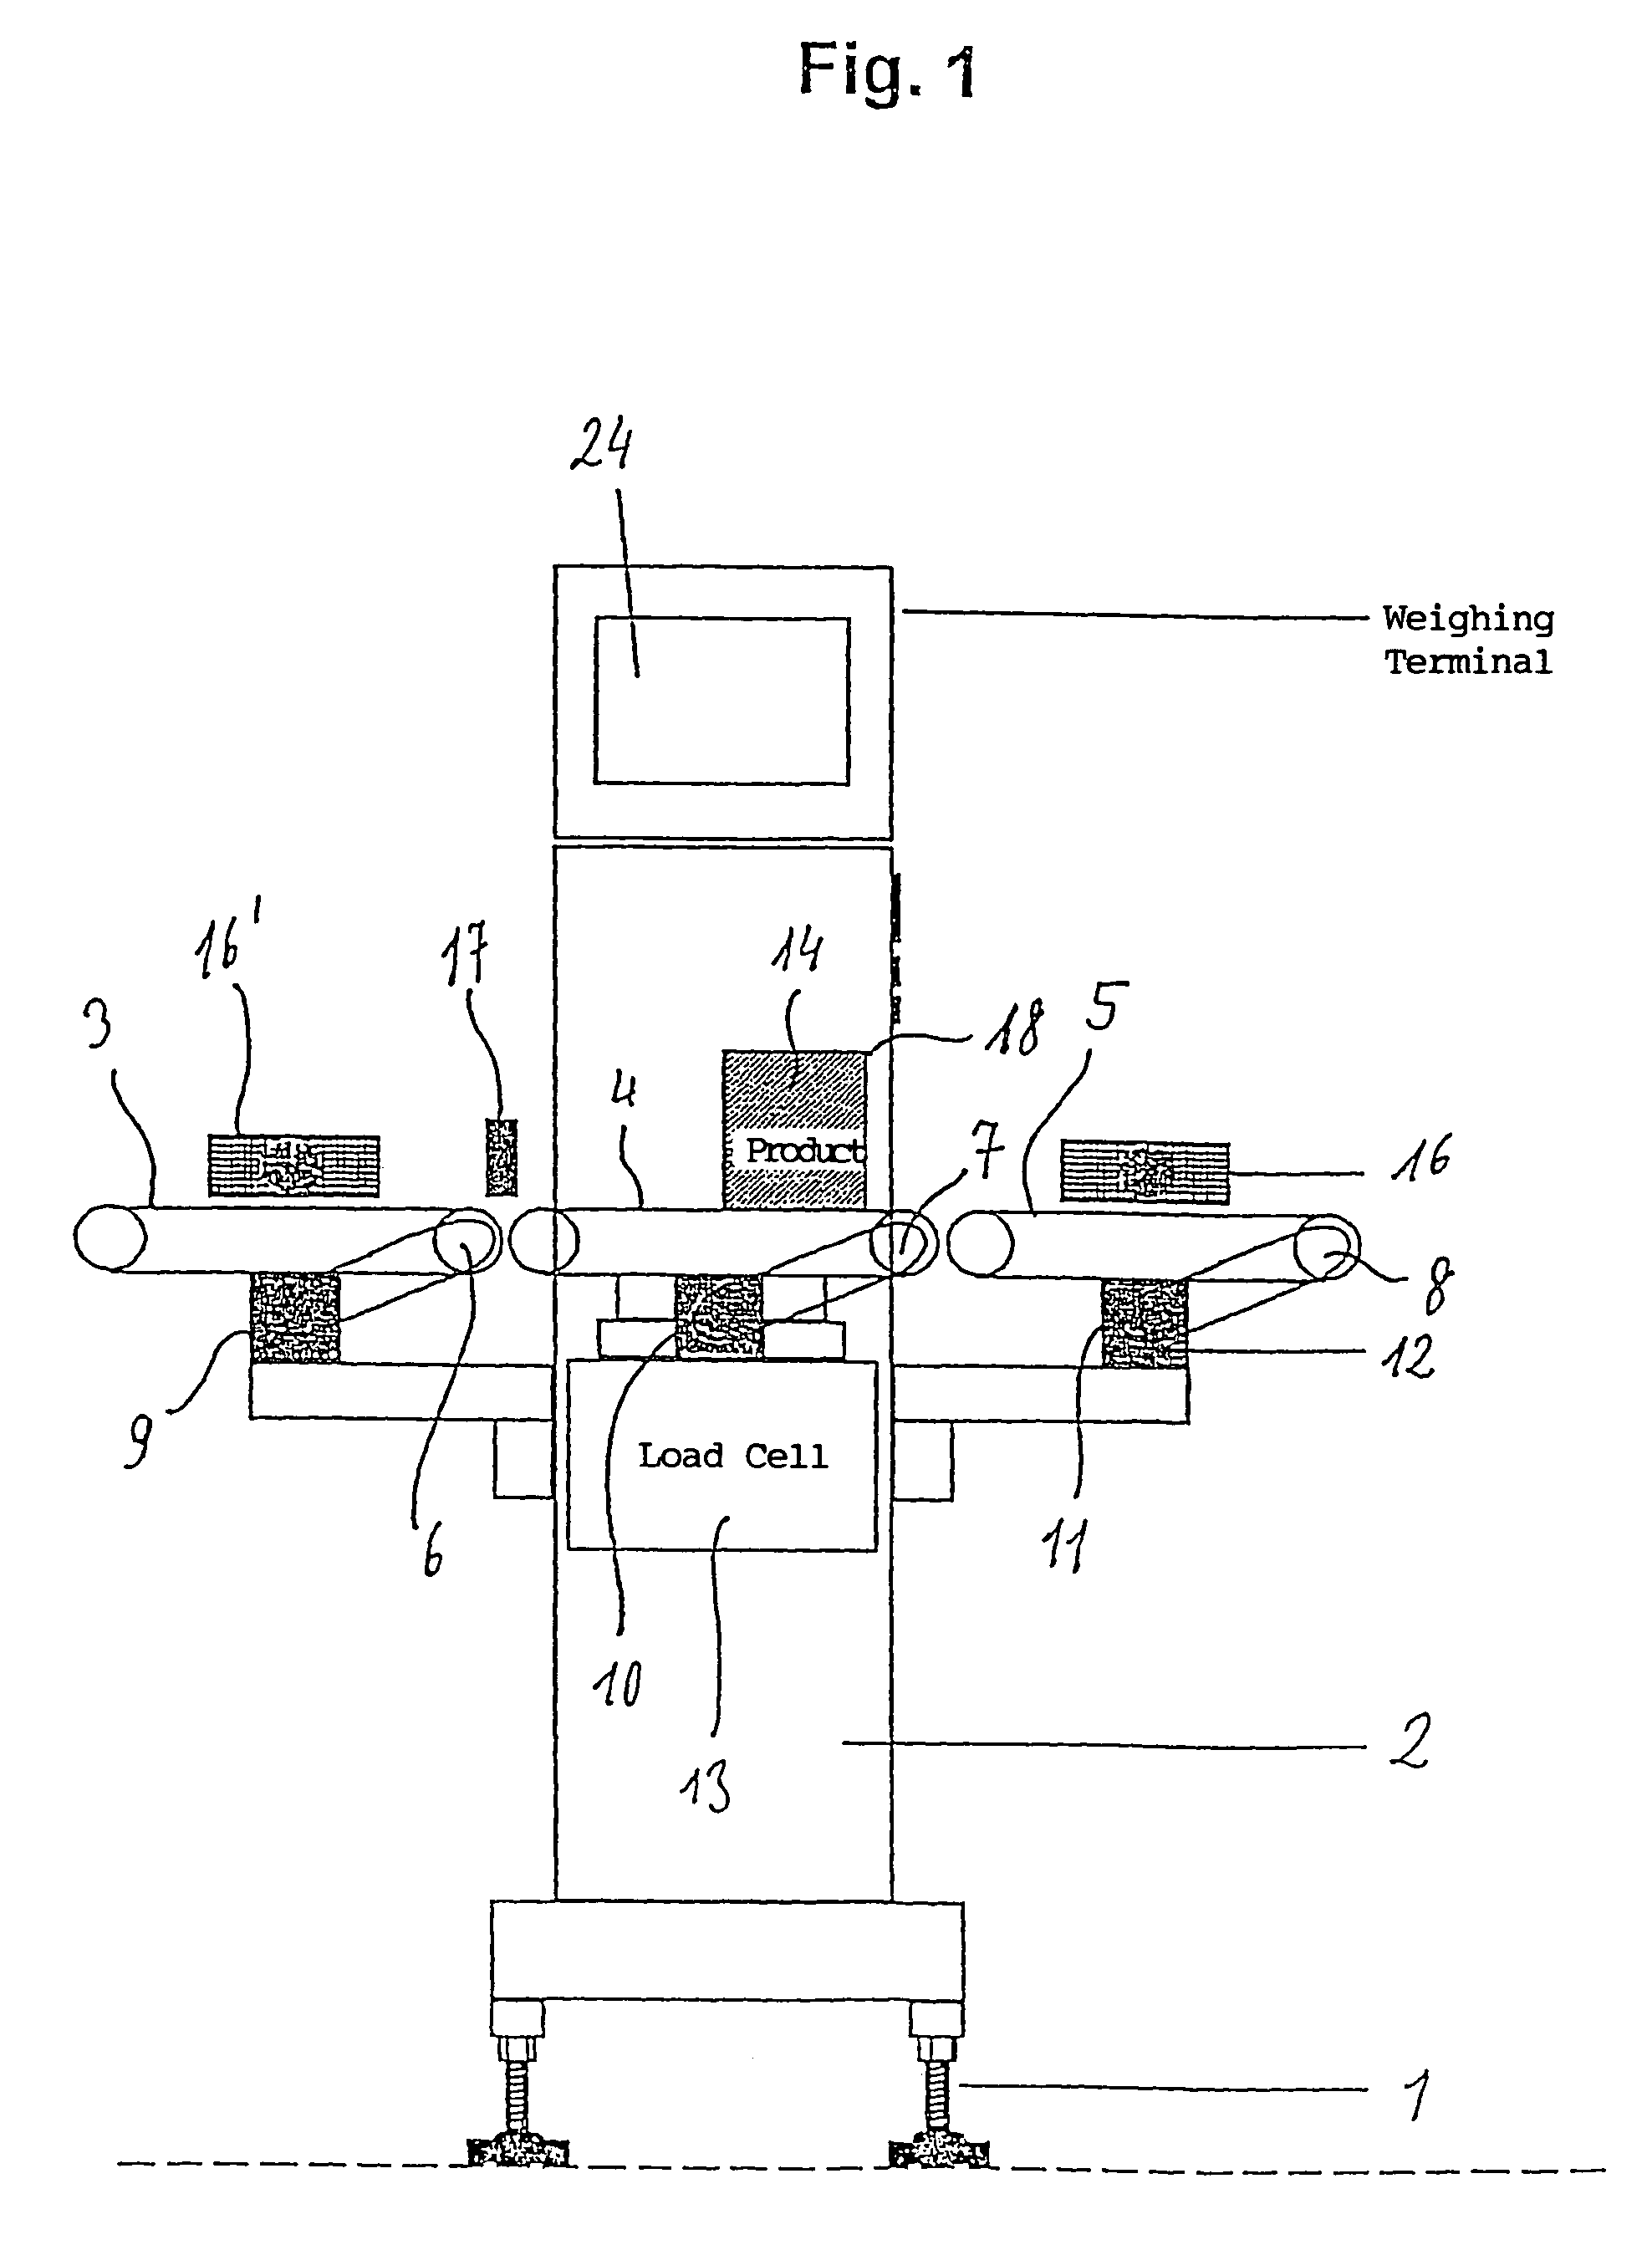 Method and device for weighing products